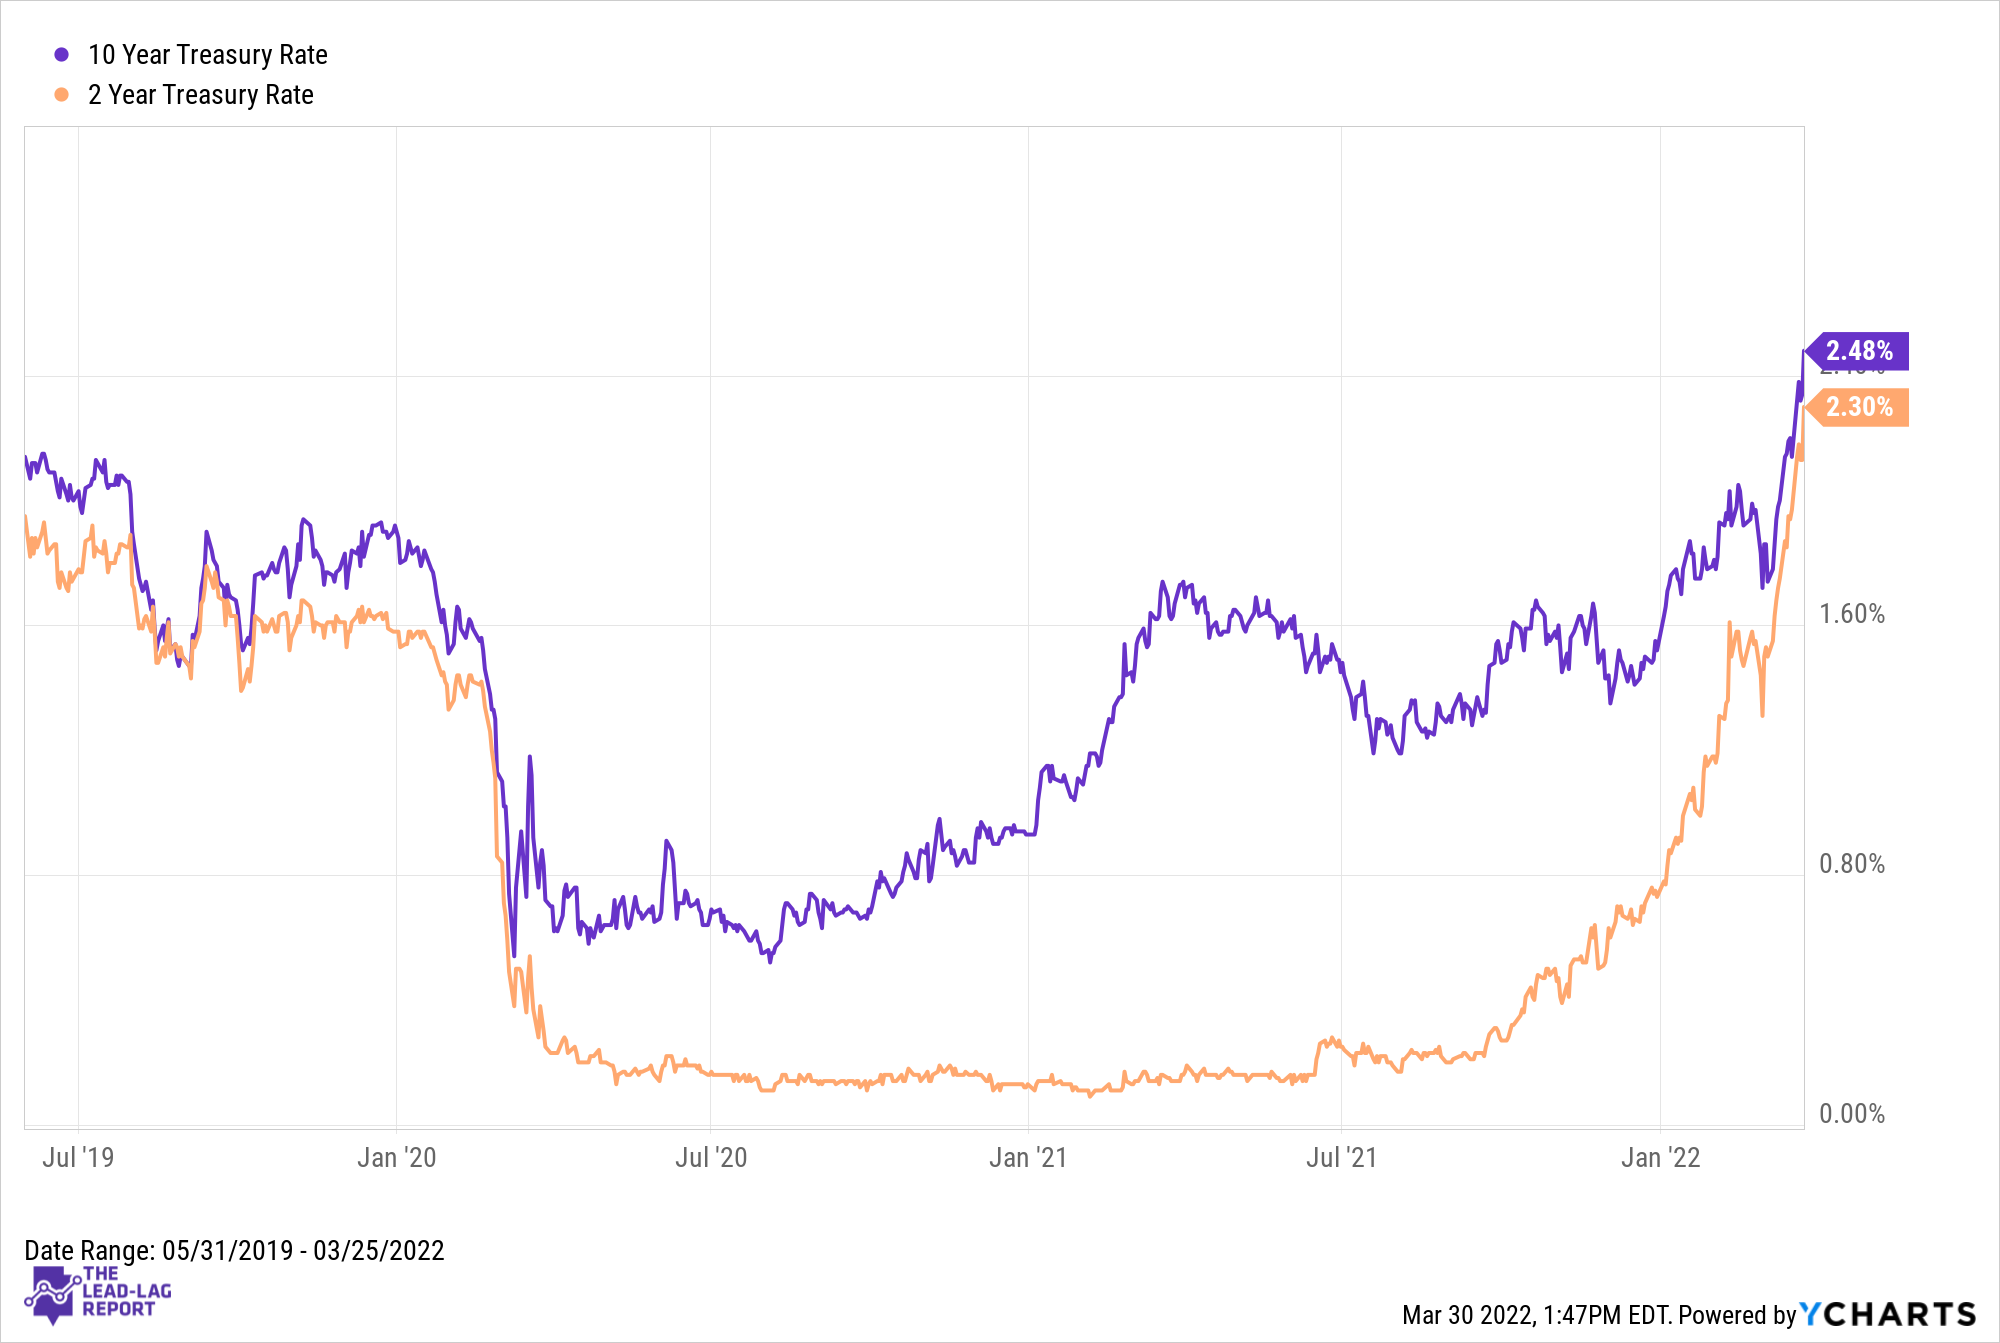 10 Year Treasury Rate compared to 2 Year Treasury Rate